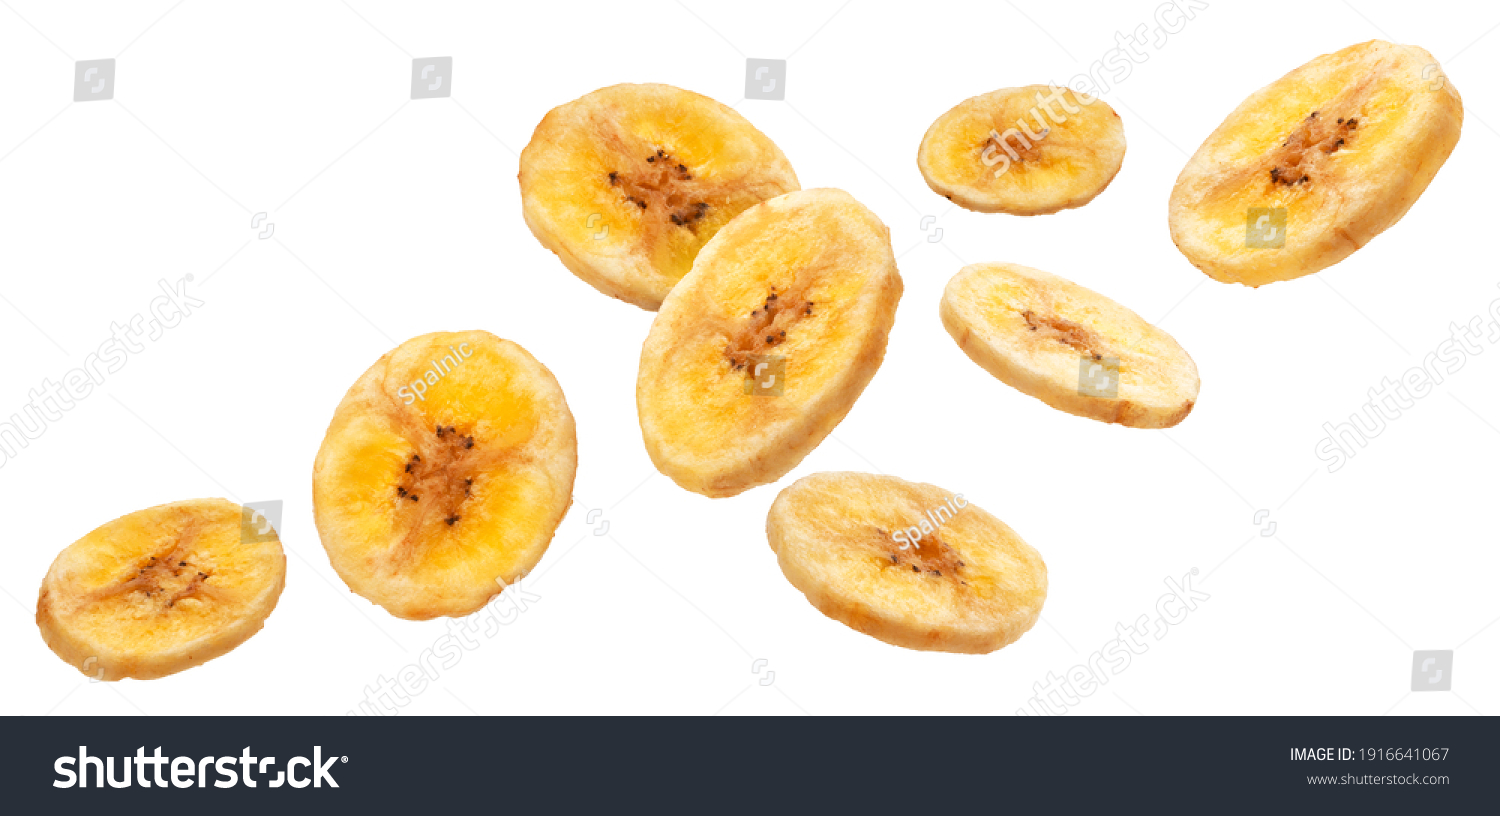 Falling dried banana slices isolated on white background with clipping path #1916641067